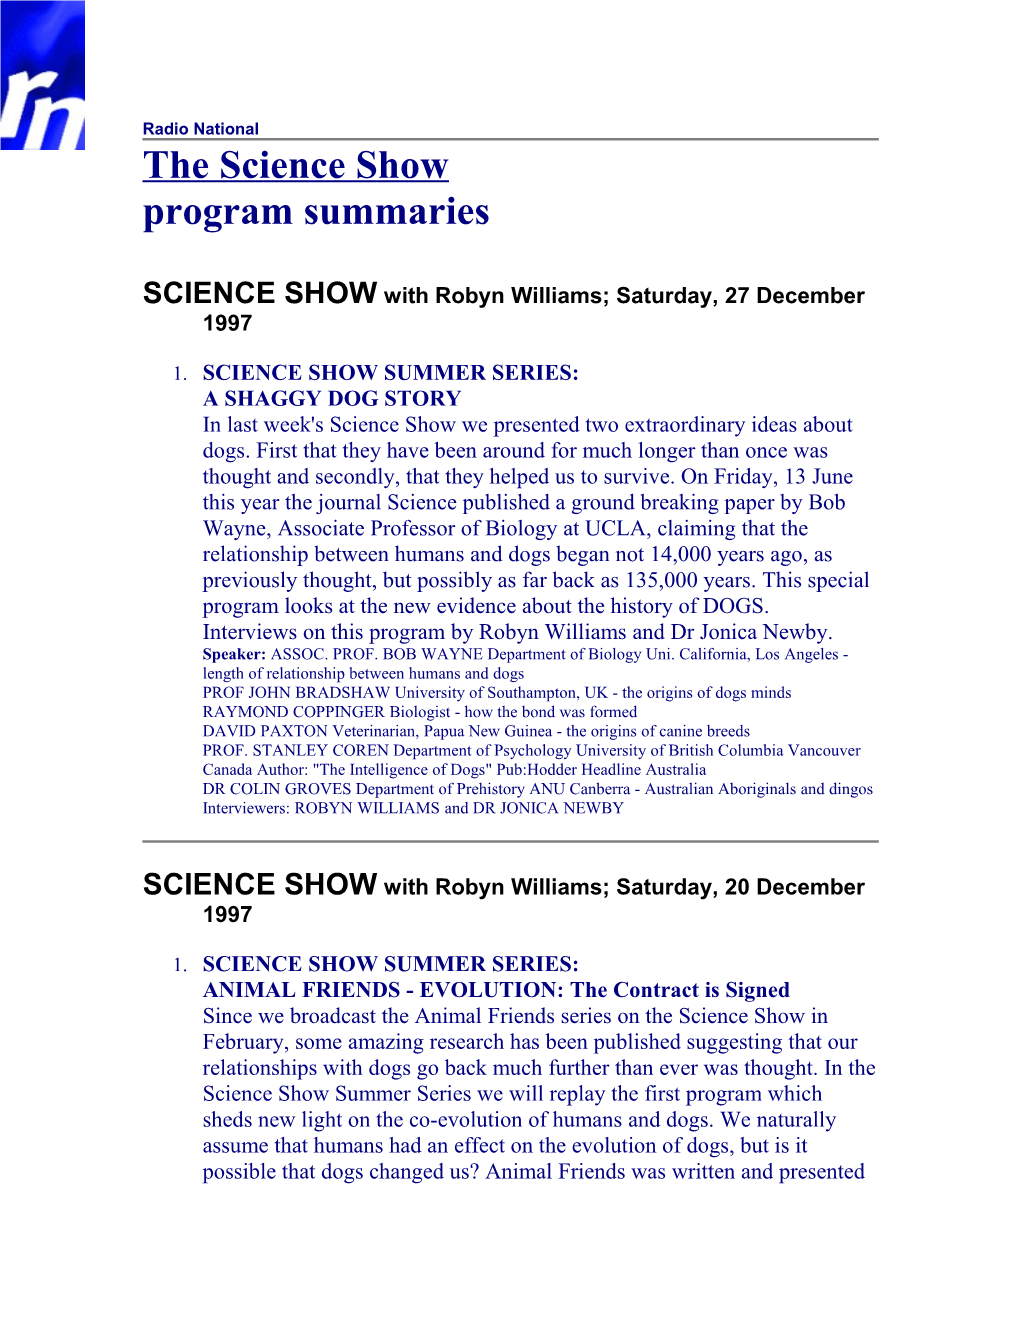 SCIENCE SHOW with Robyn Williams; Saturday, 27 December 1997